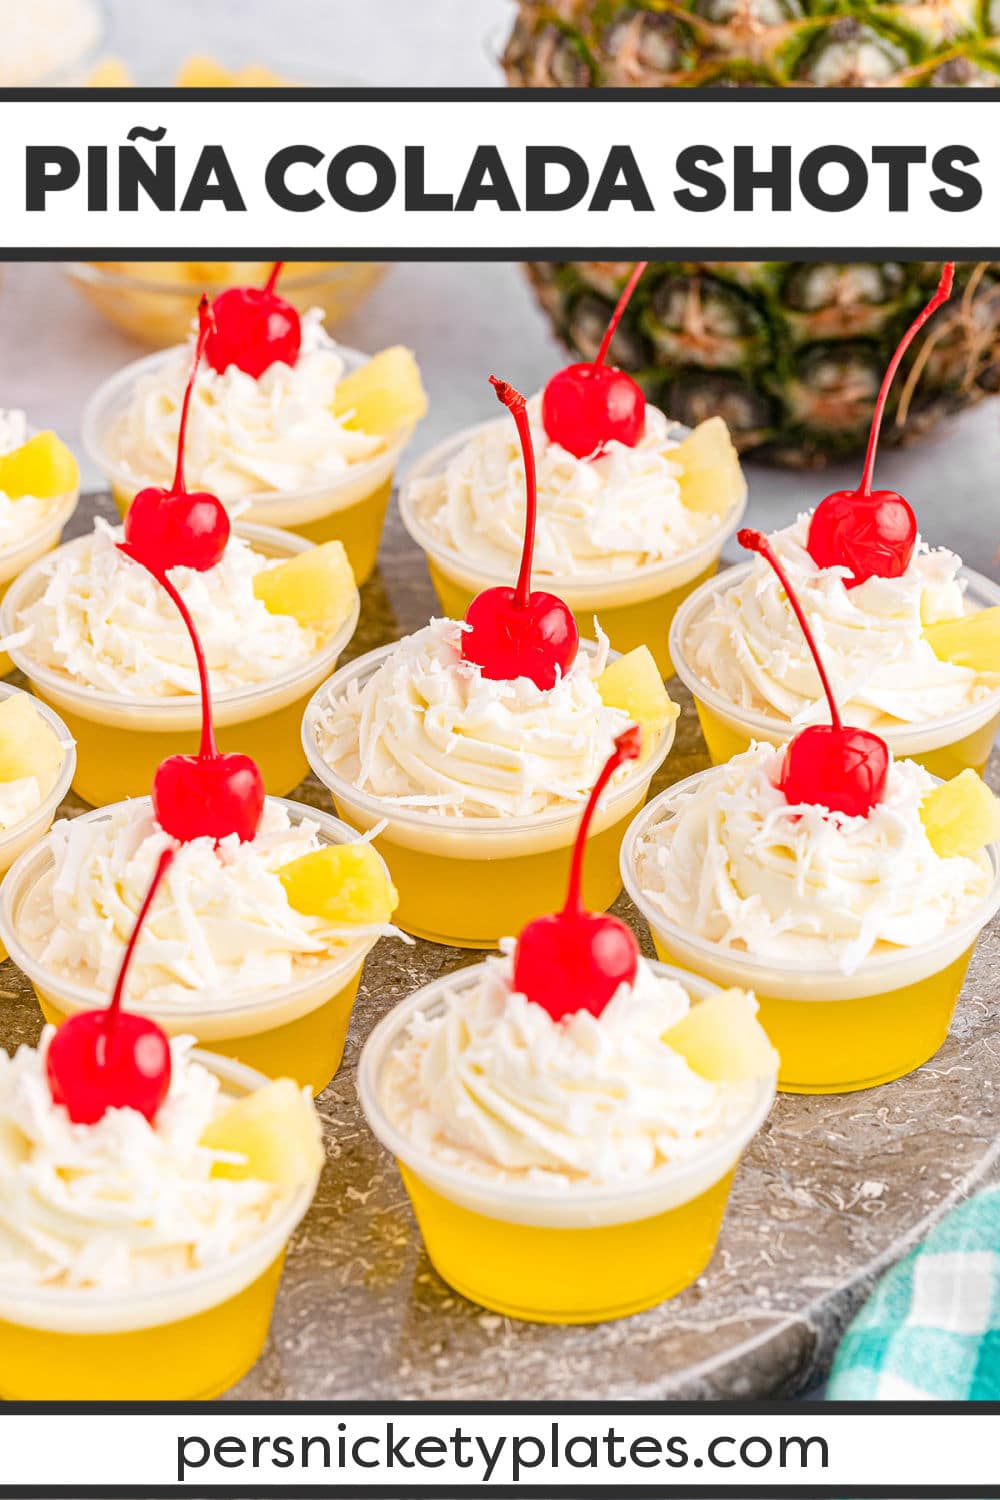 These Pina colada jello shots are a twist on everyone’s favorite beach vacation cocktail! Made with two distinct layers of yellow and white, we’re bringing pineapple flavors and coconut flavors together in one tasty treat! These fun jello shots are always a good idea when hosting any kind of party as a great way to combine a dessert and cocktail in one! | www.persnicketyplates.com